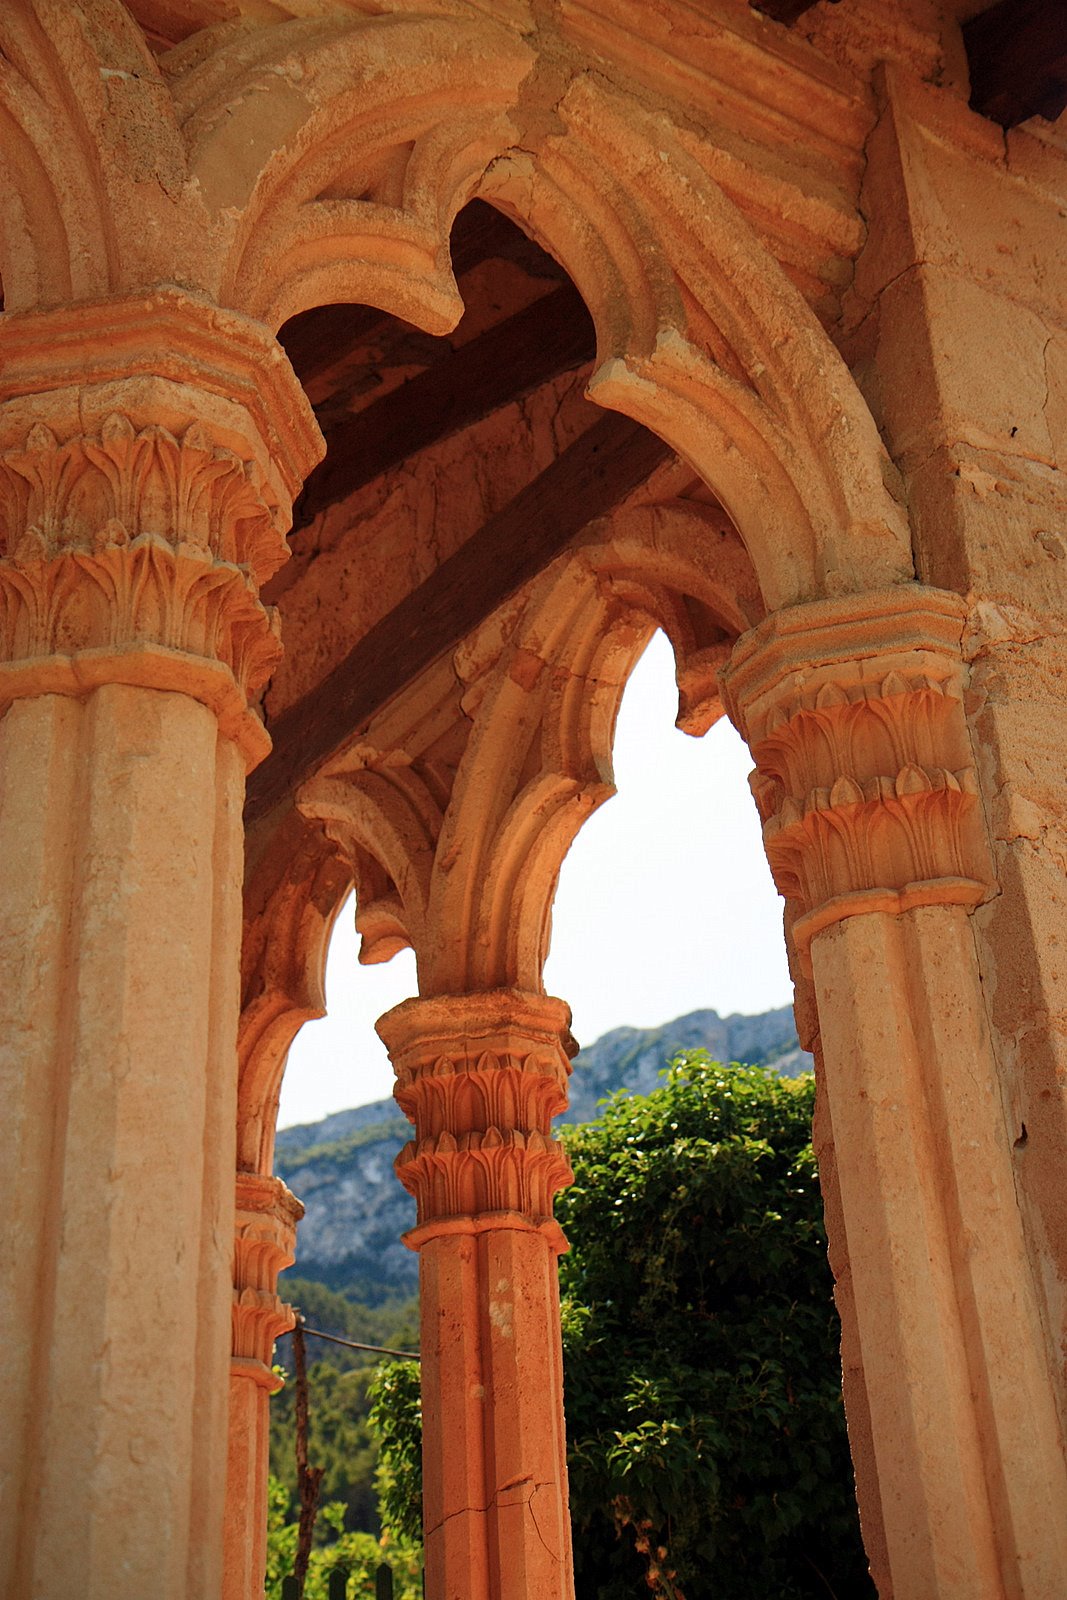 The rusty sandstone pillars of the Miramar Monastery easily make it one of the most beautiful houses and gardens in Majorca